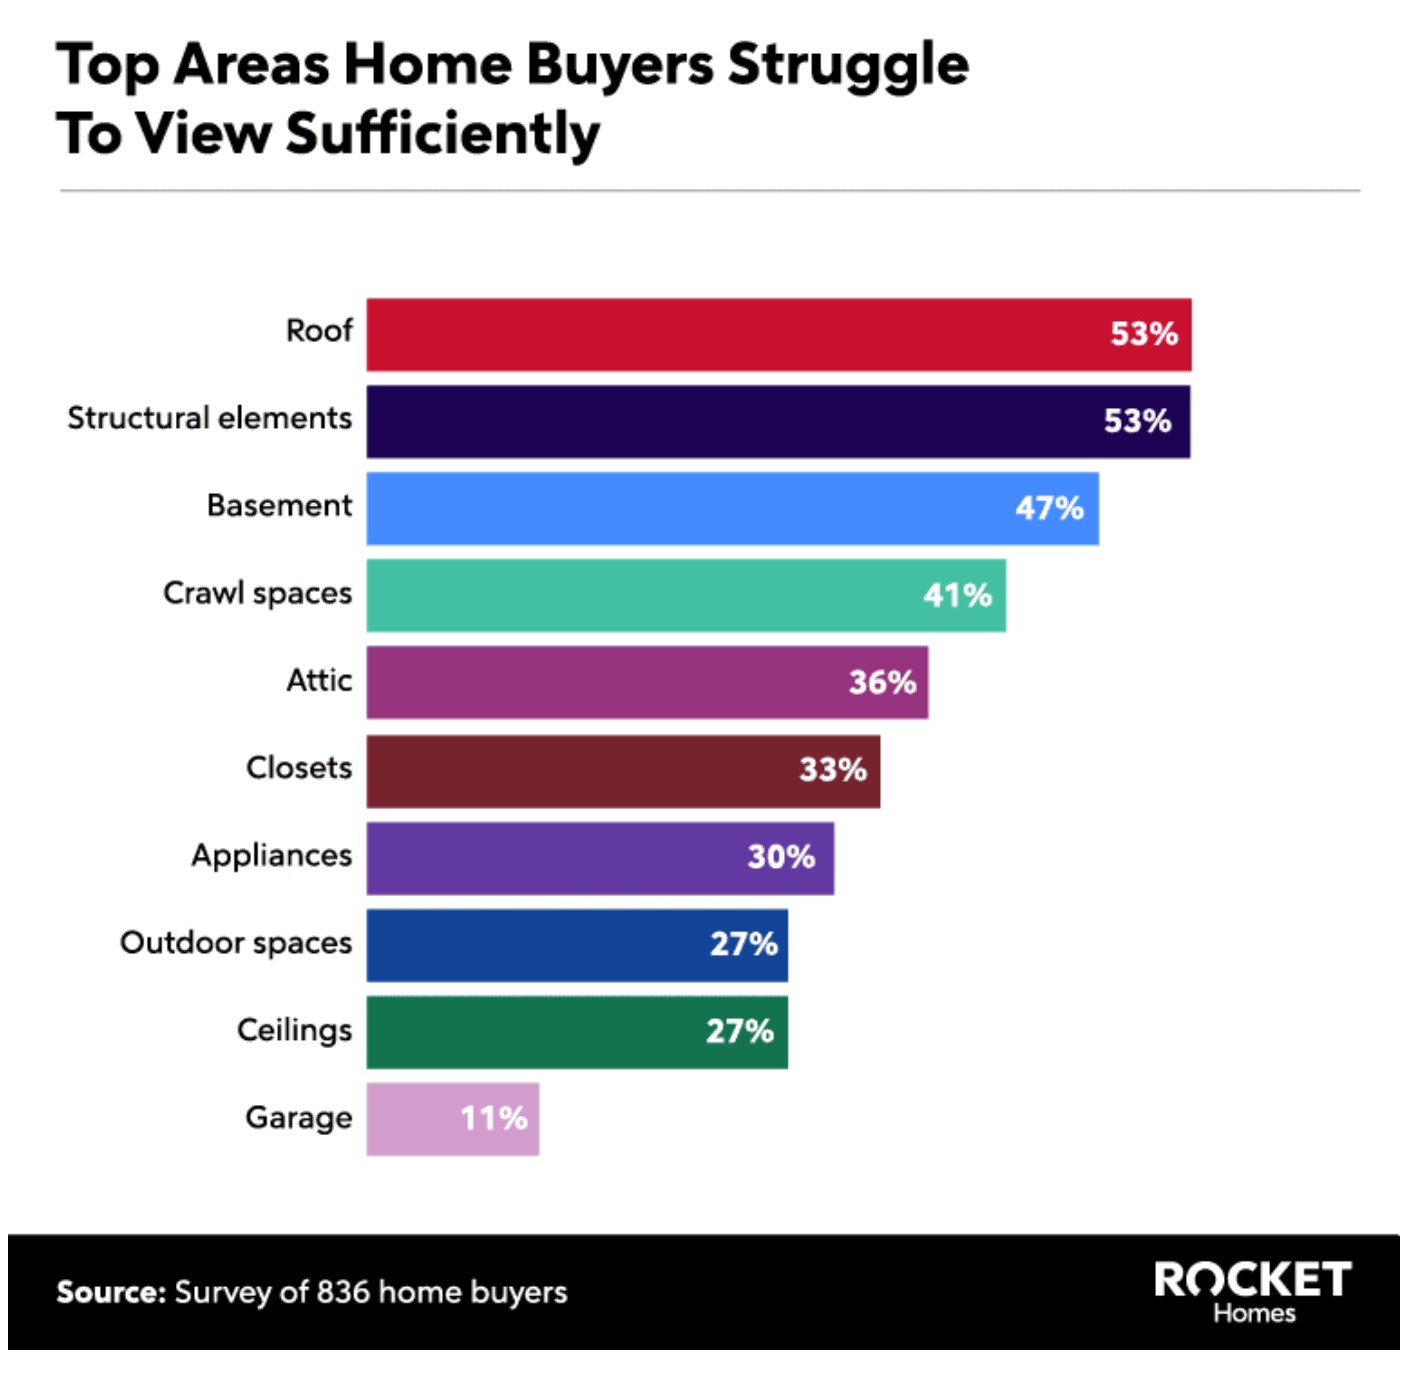 A bar chart showing the areas of homes that buyers struggle to view sufficiently on home tours.